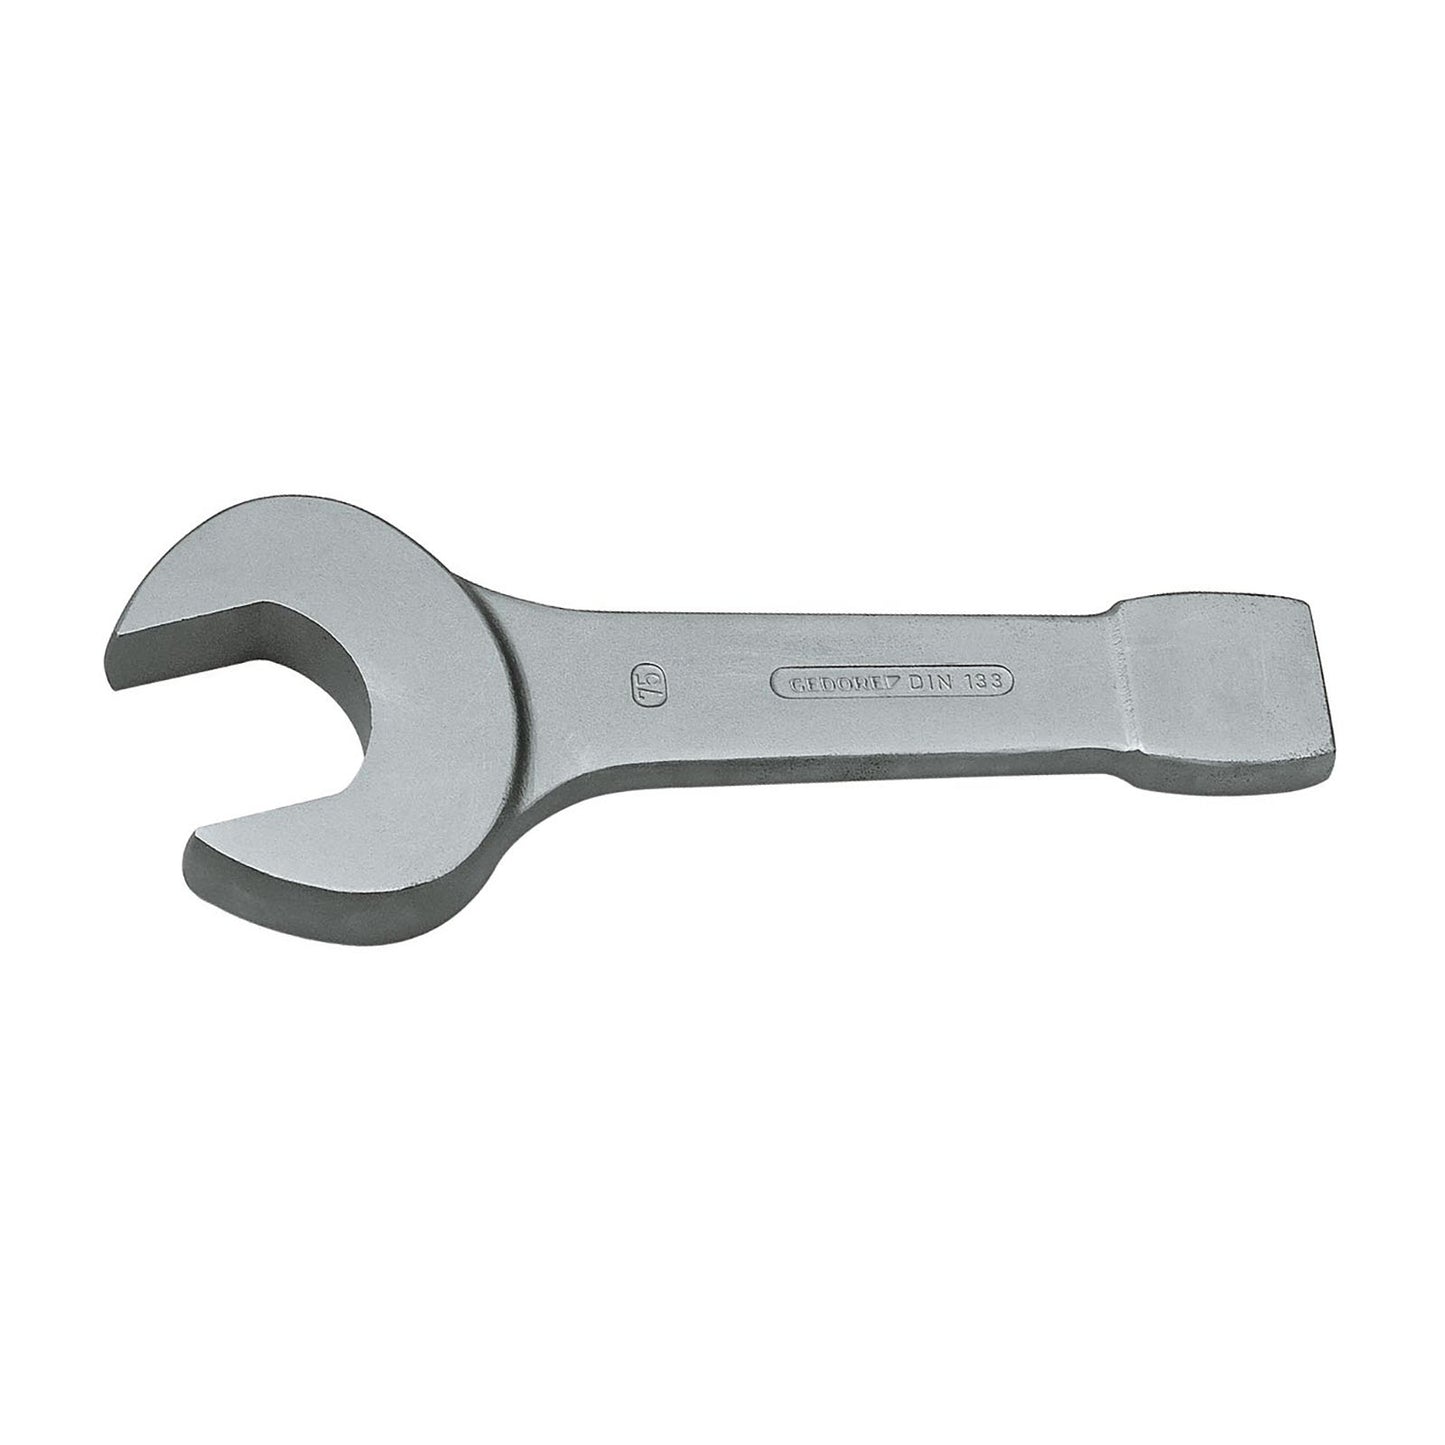 GEDORE 133 27 - Open Strike Wrench, 27mm (6410570)